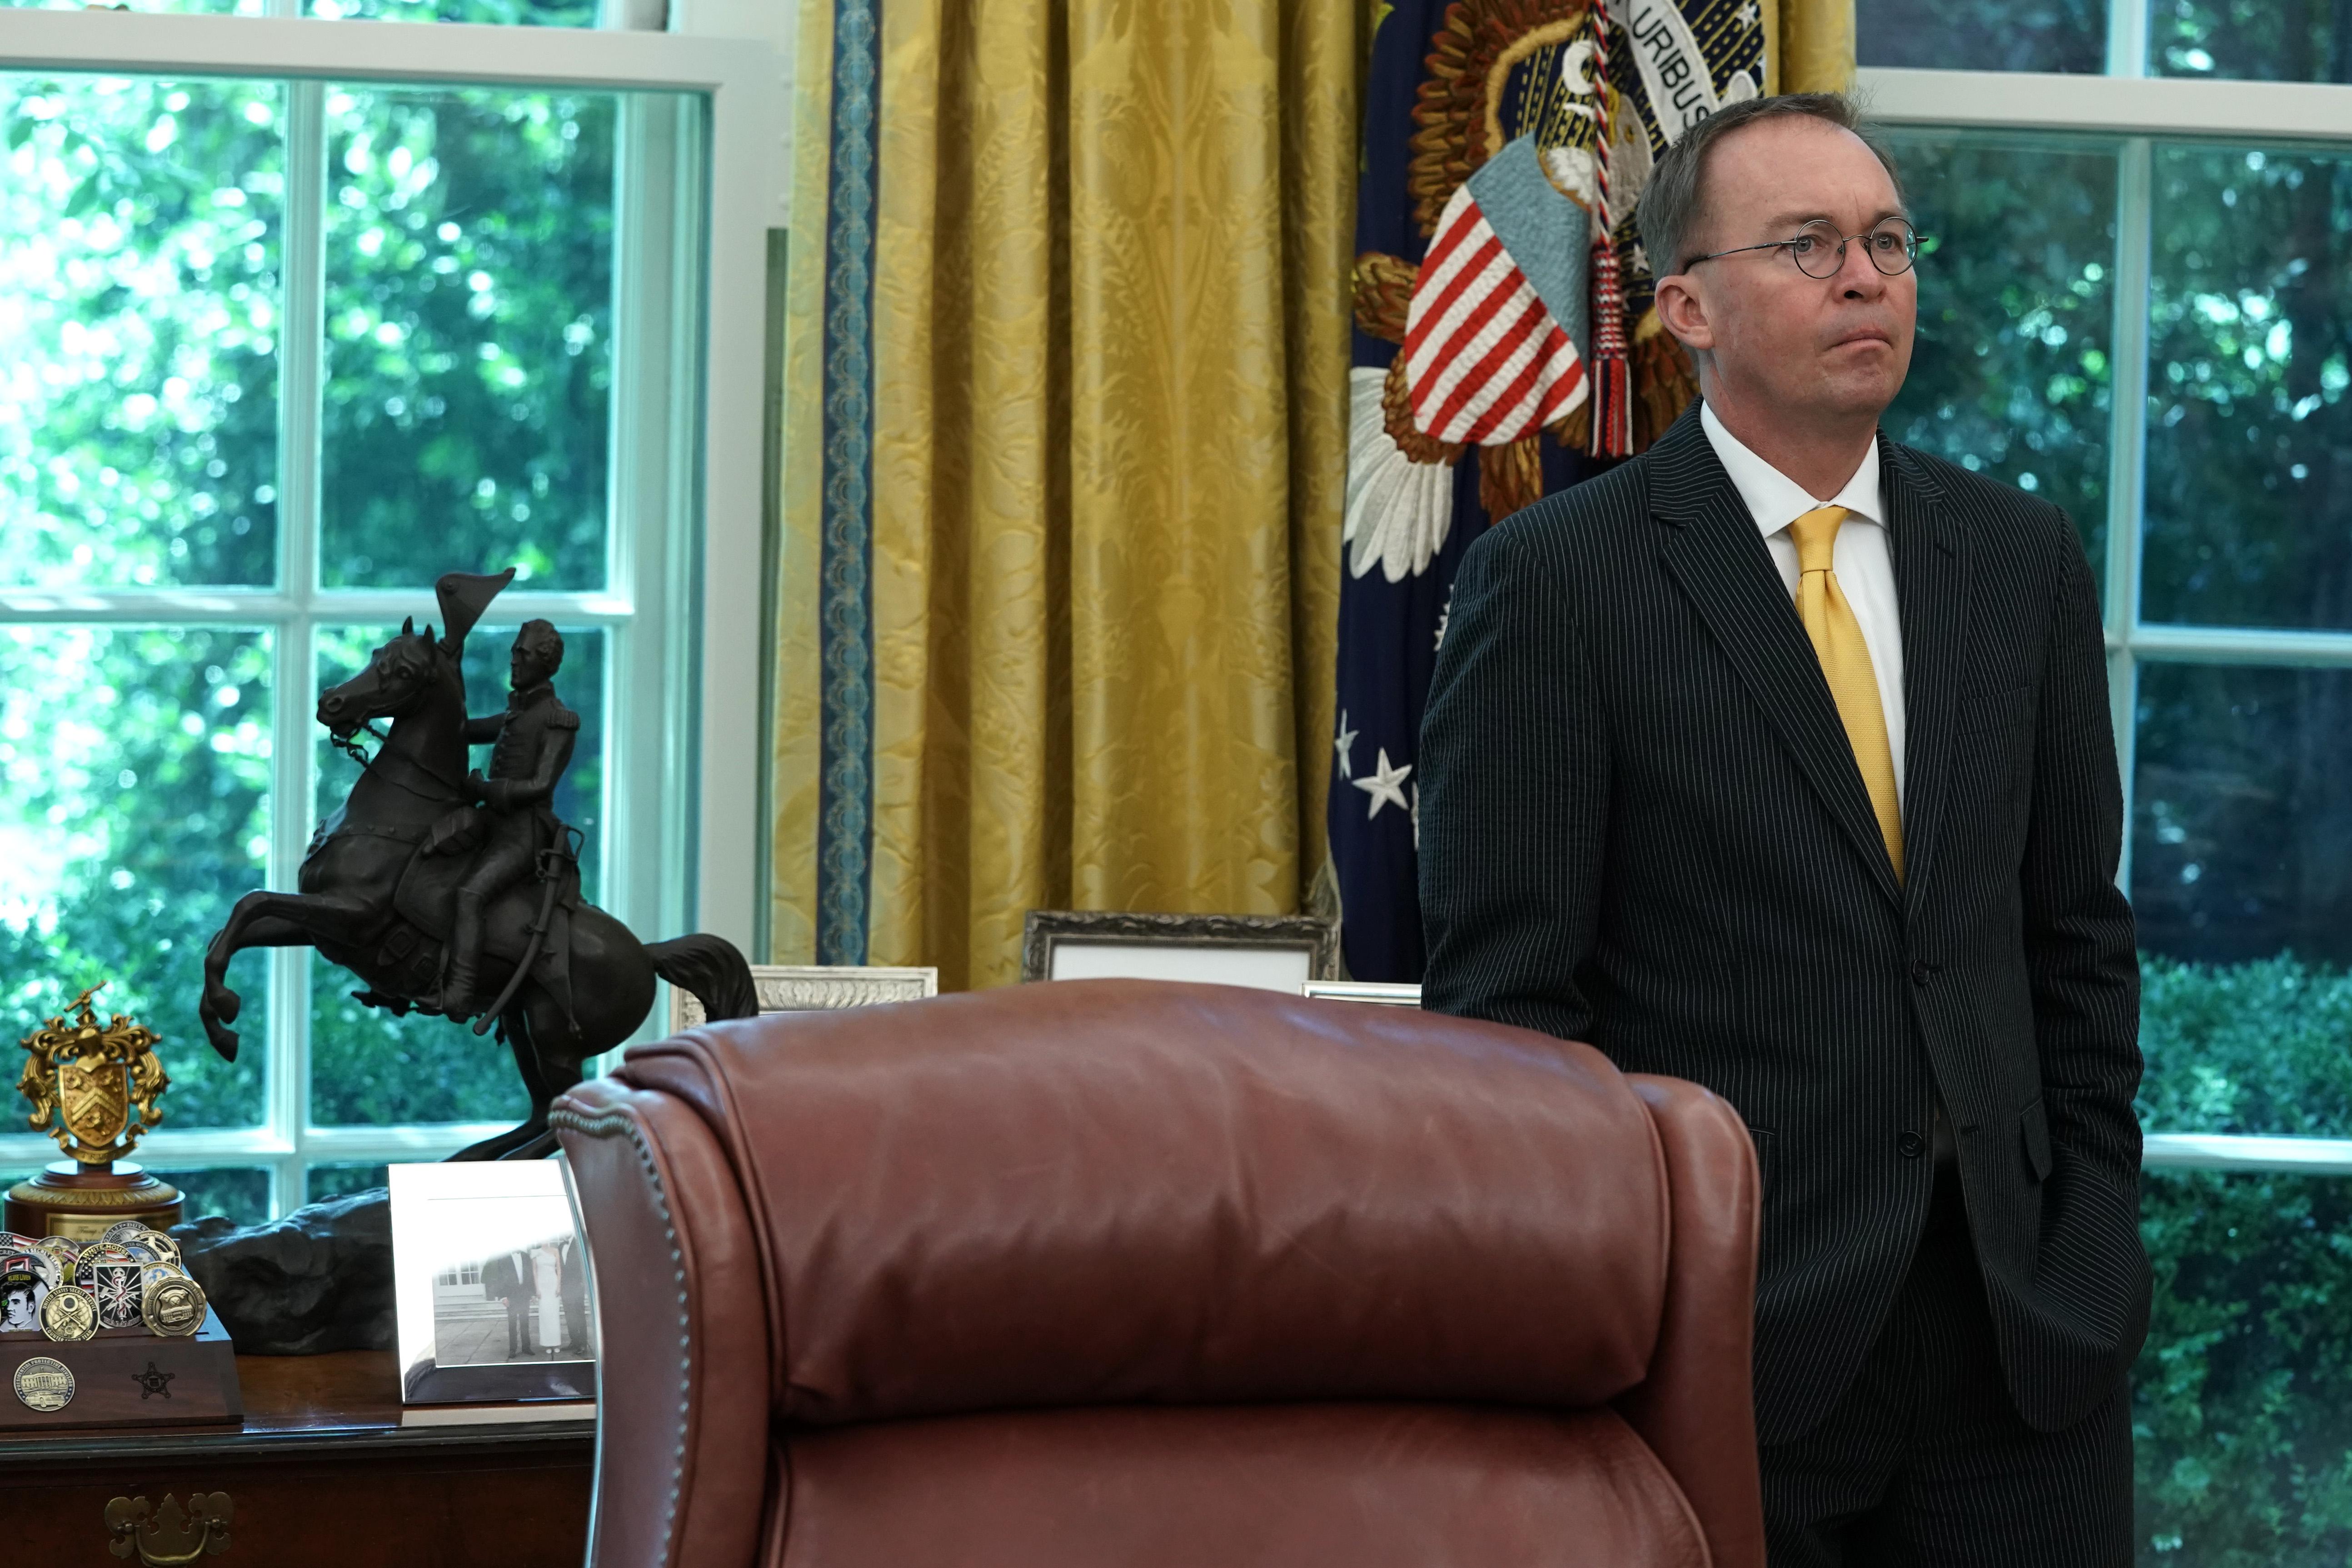 Acting White House Chief of Staff Mick Mulvaney listens during a meeting between President Donald Trump and Qatari Emir Sheikh Tamim bin Hamad Al Thani in the Oval Office at the White House July 9, 2019 in Washington, D.C.